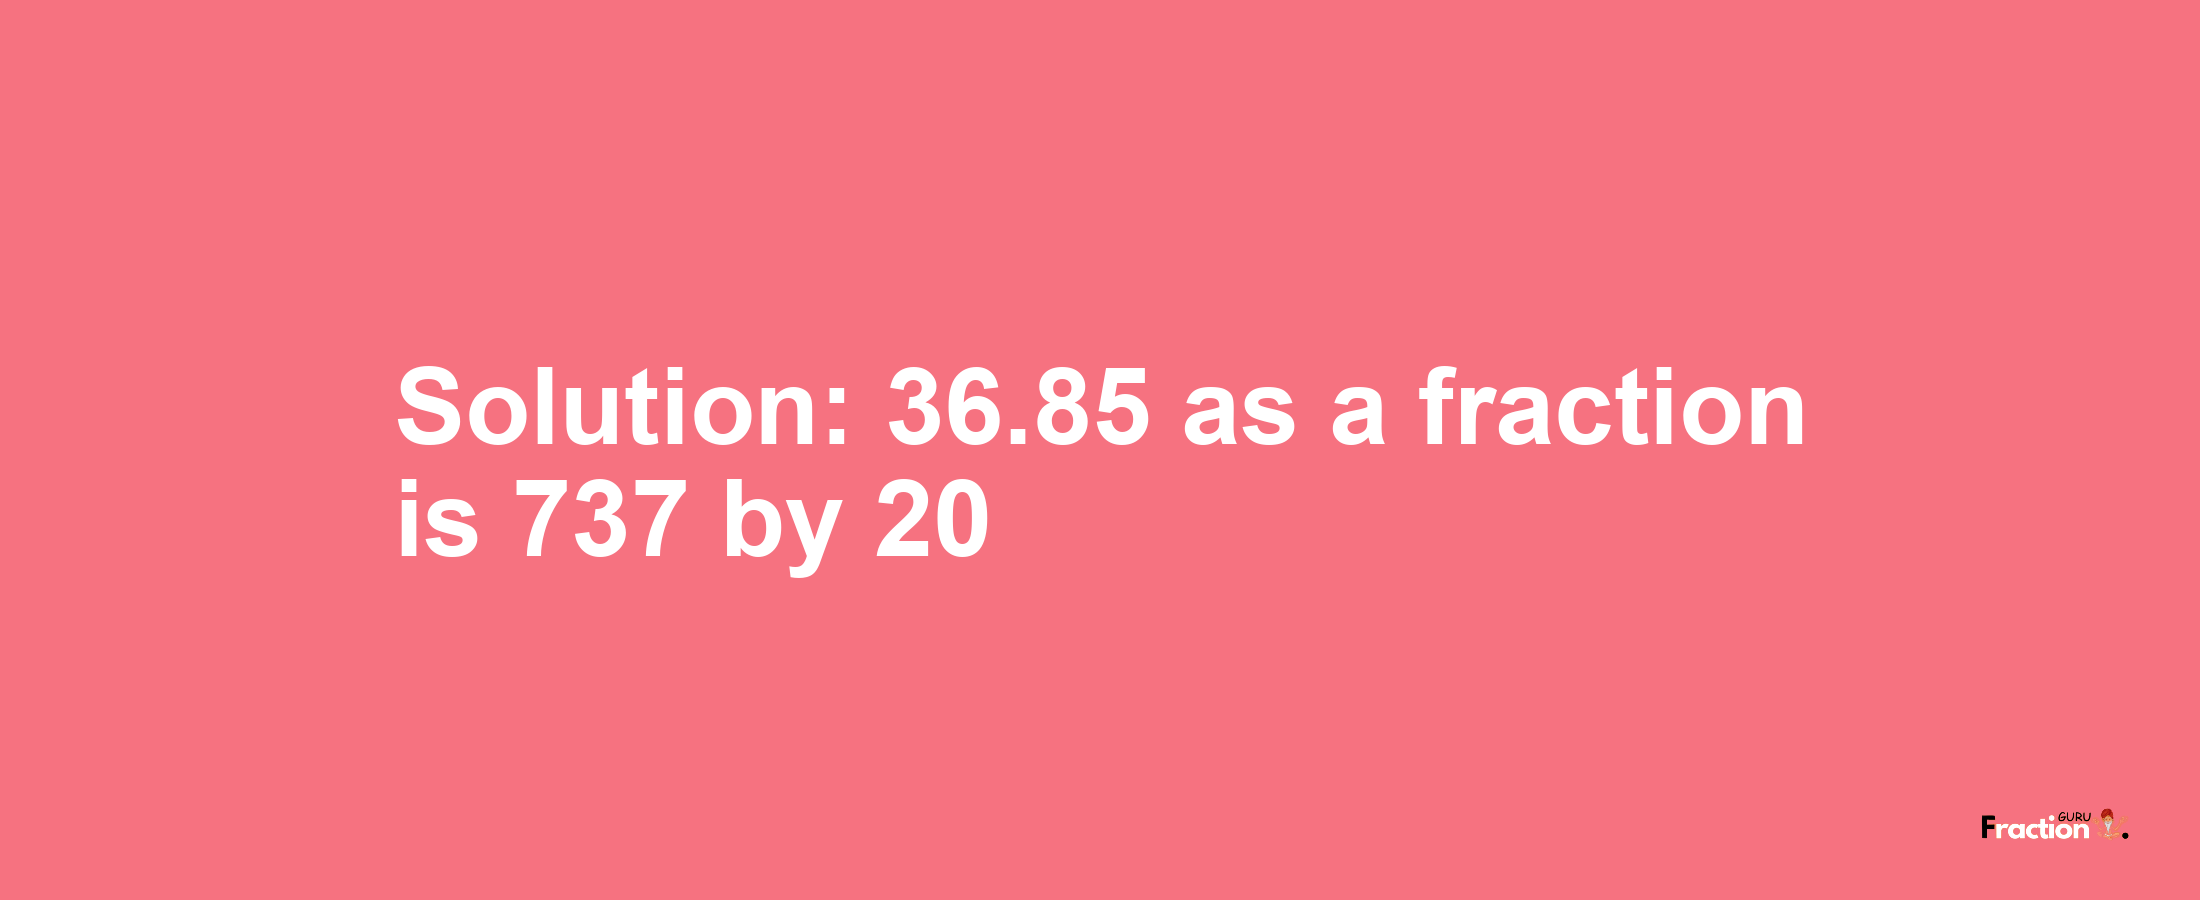 Solution:36.85 as a fraction is 737/20